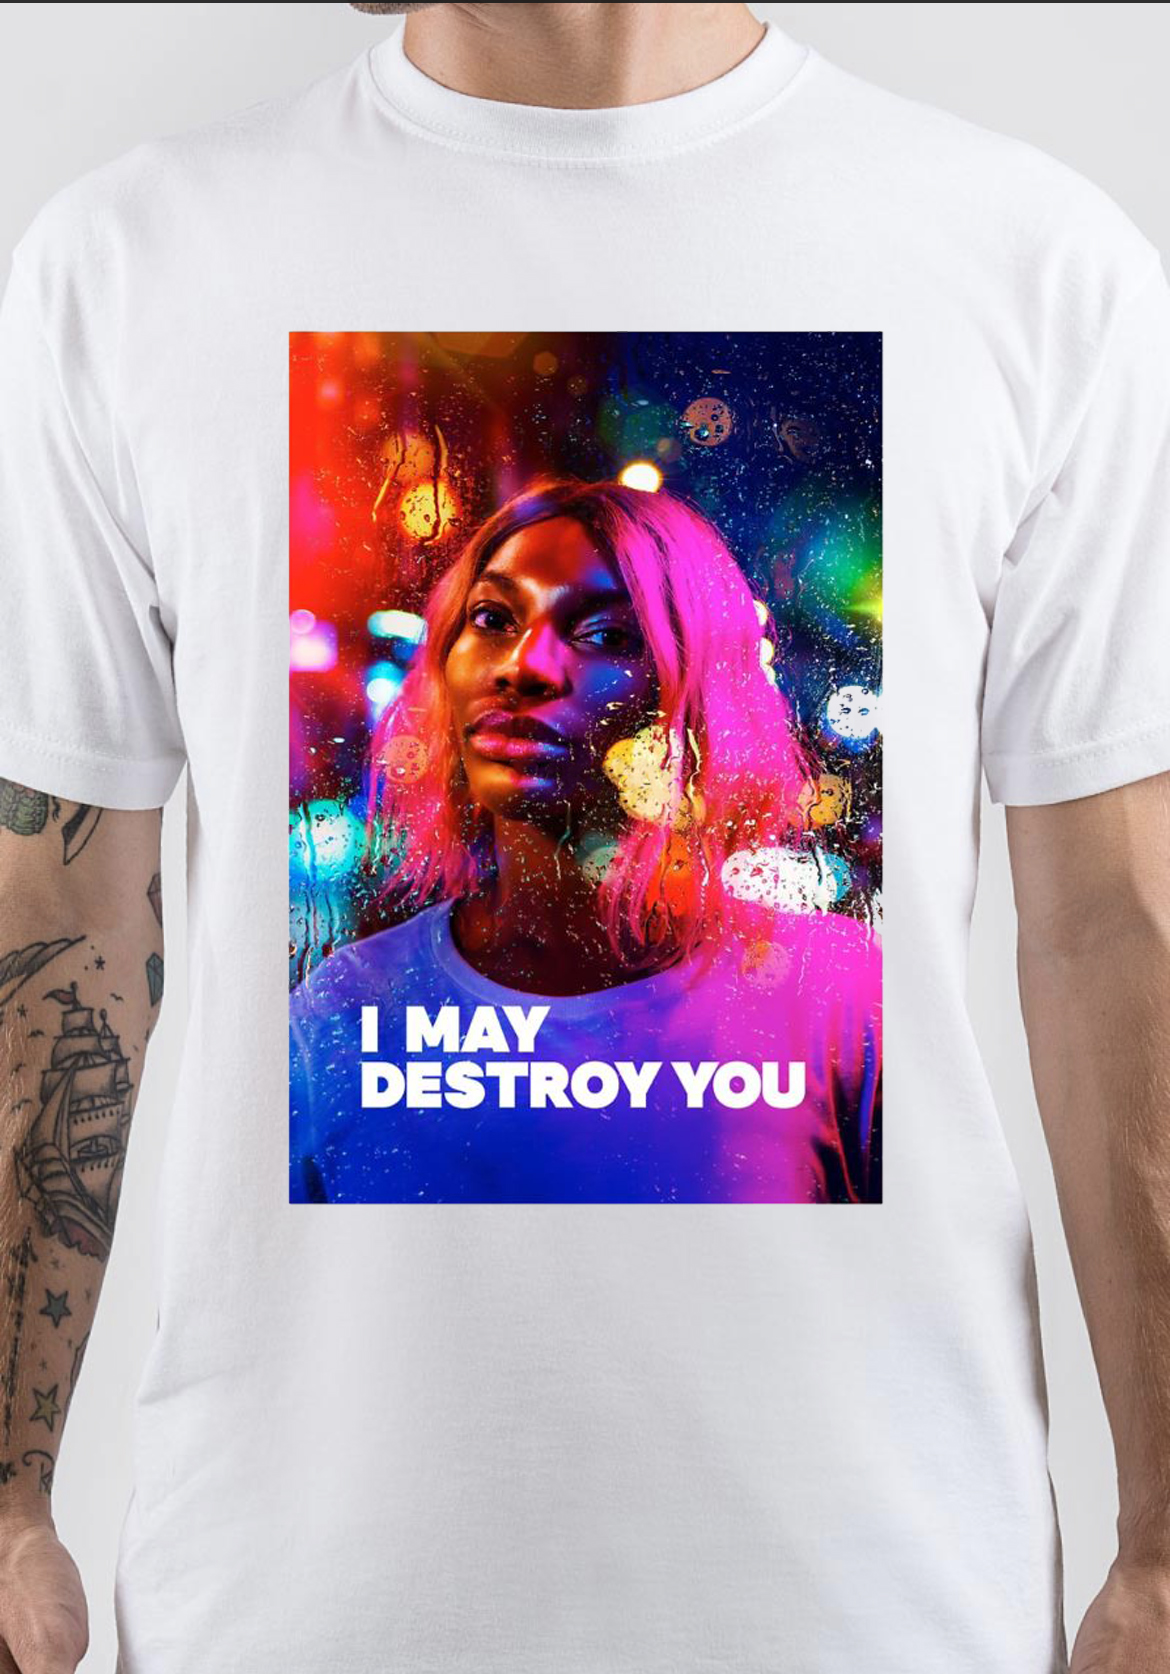 I May Destroy You T-Shirt And Merchandise